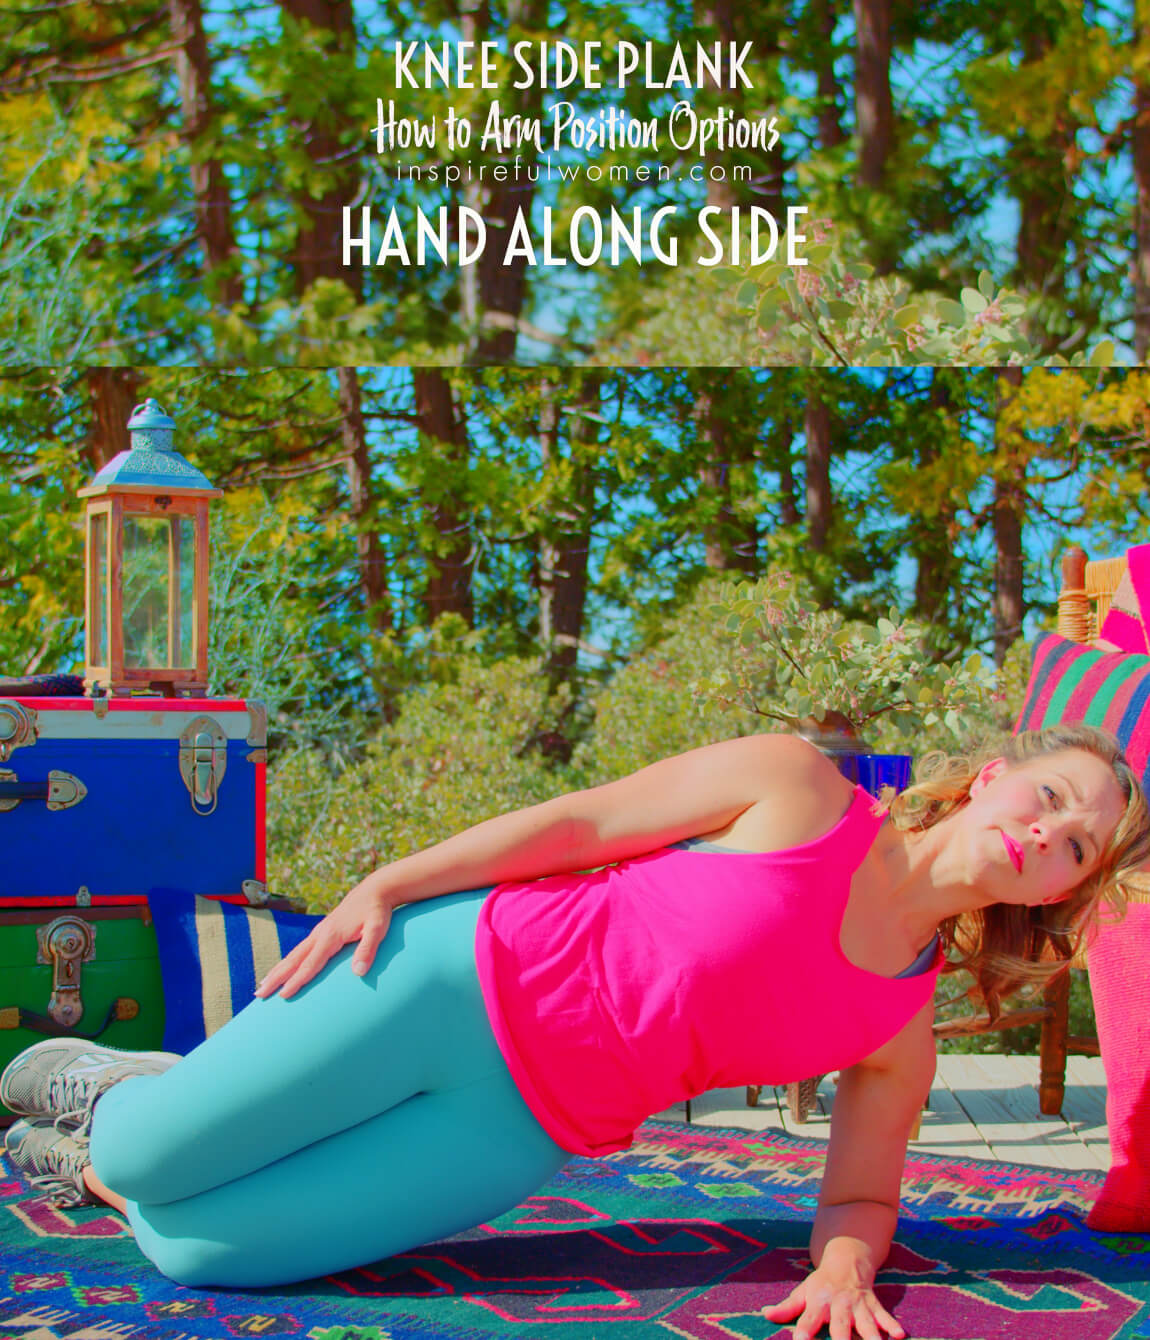 hand-along-side-arm-position-knee-forearm-side-plank-core-exercise